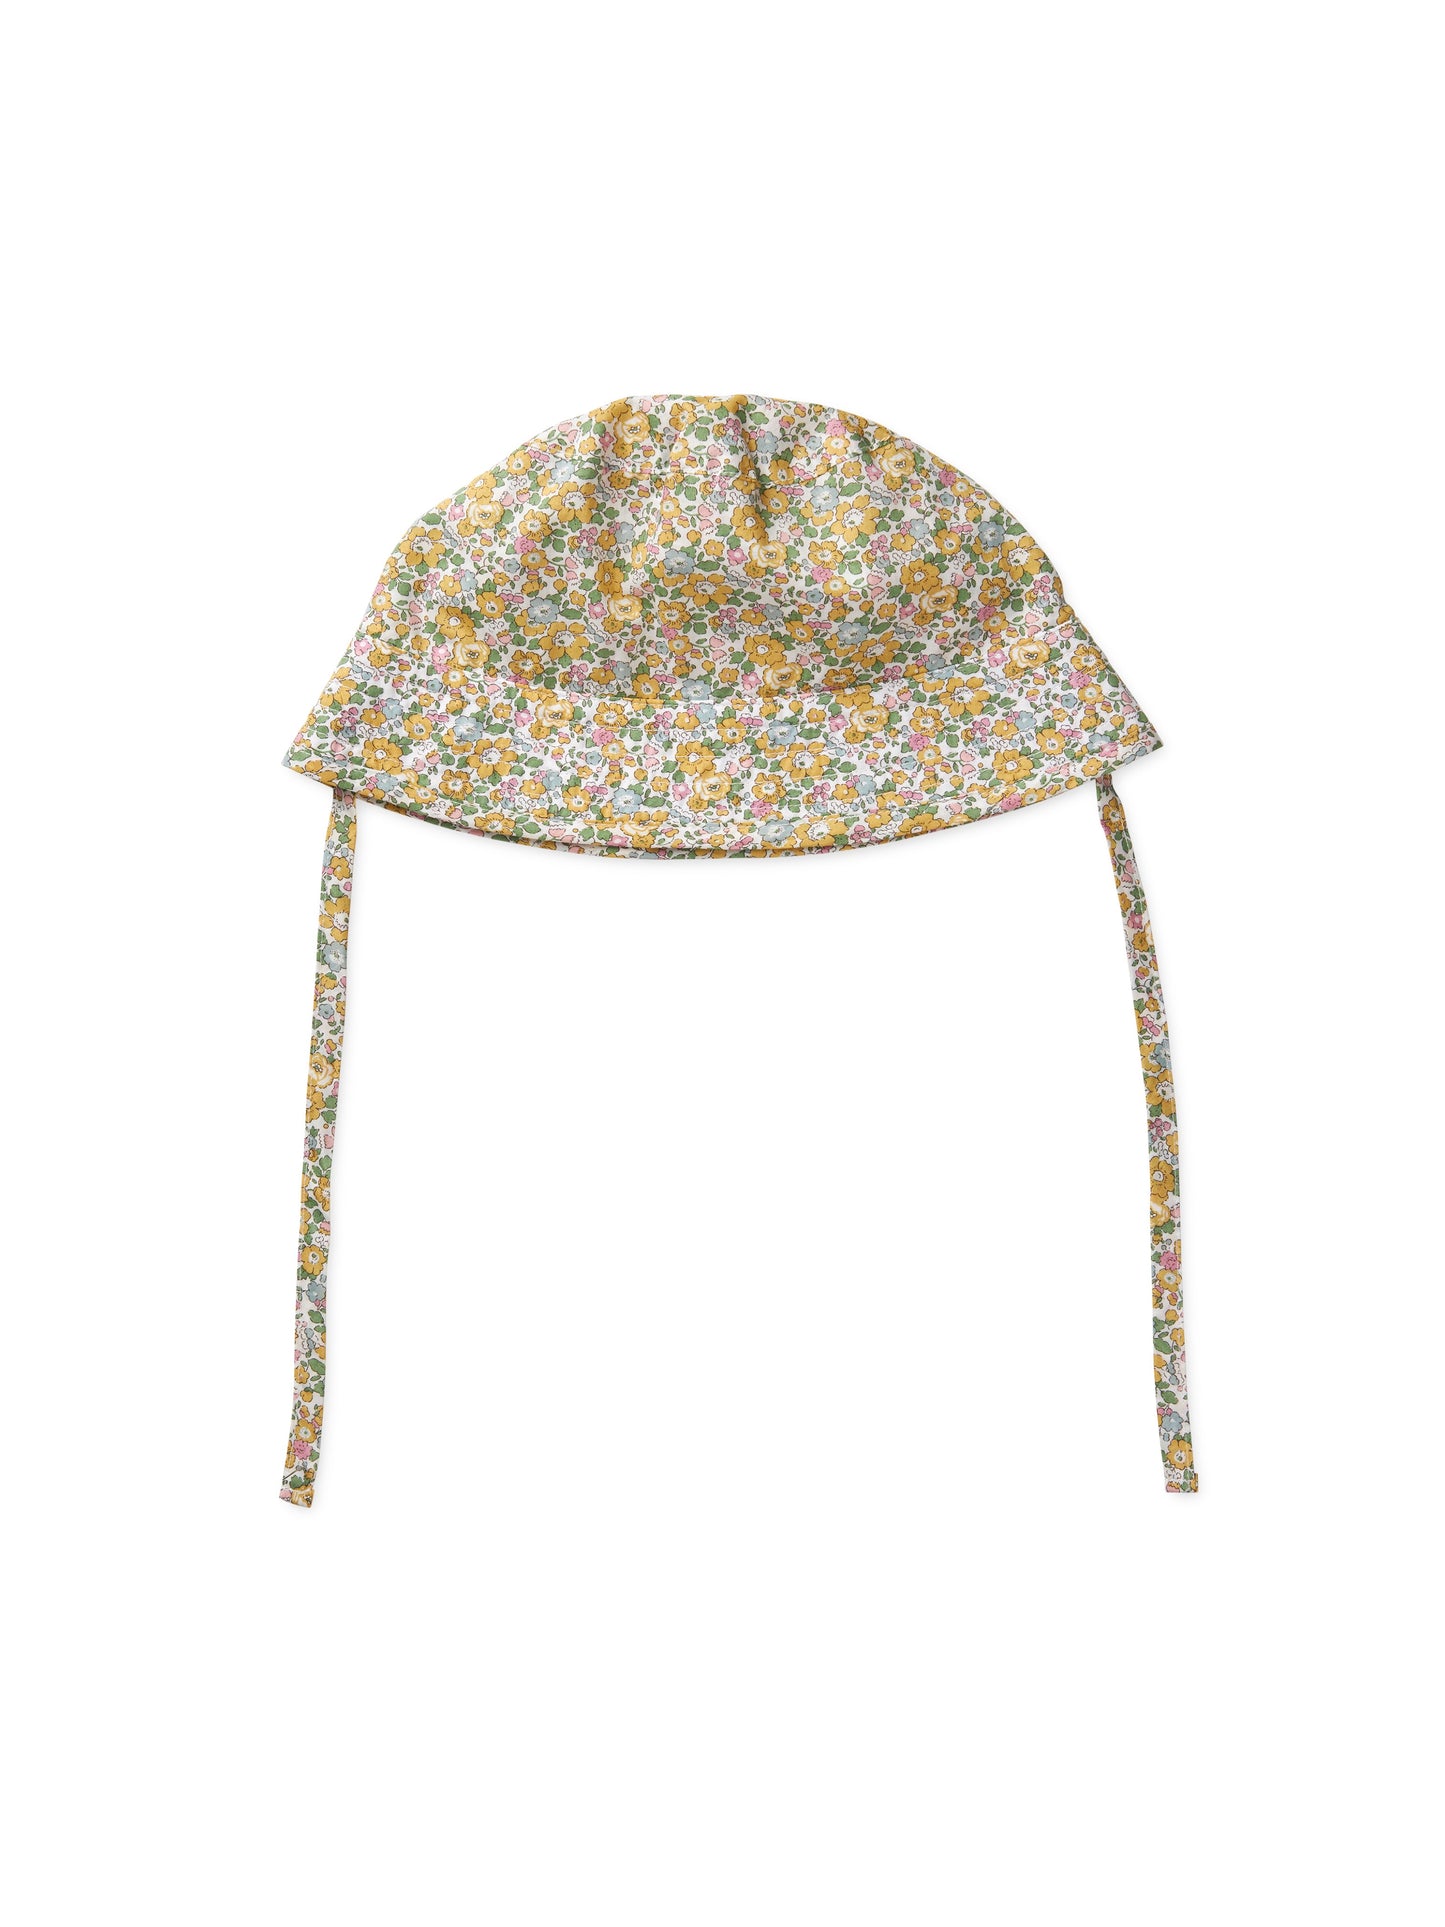 Lalaby - Loui baby hat - Liberty Betsy Ann